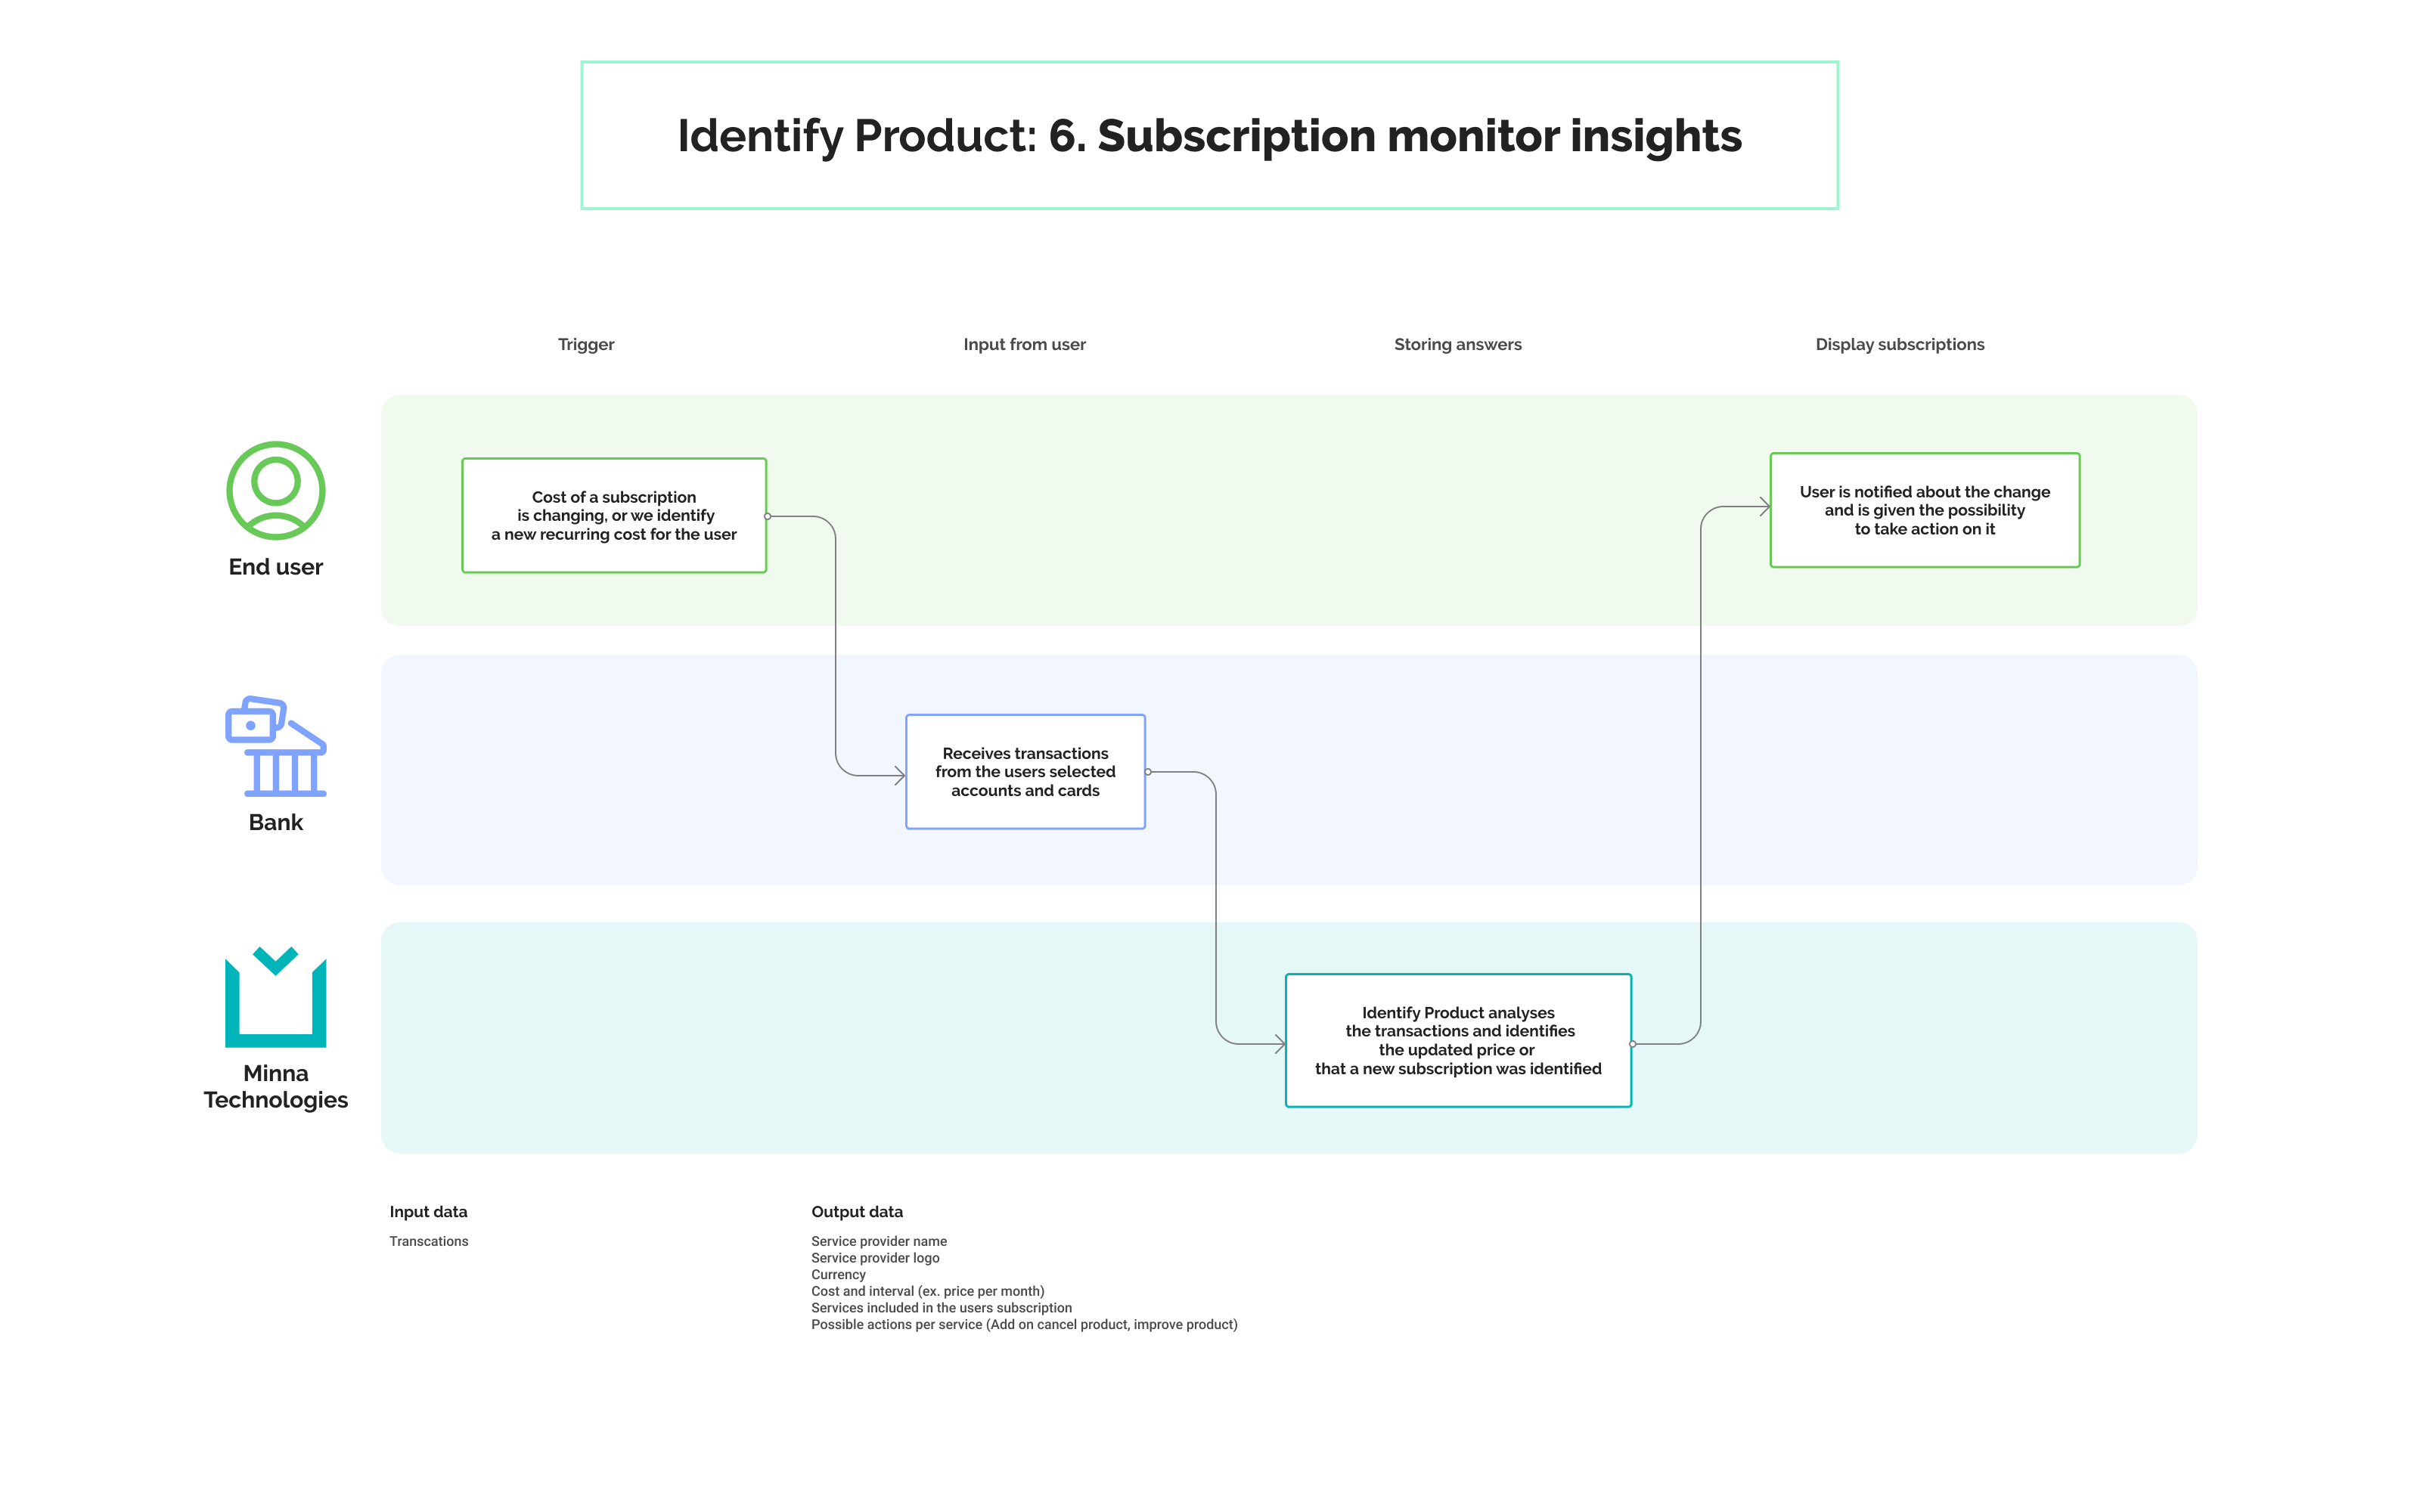 If Monitoring insights have been implemented, user can be notified when an already identified subscription changes price, or when new subscriptions are detected